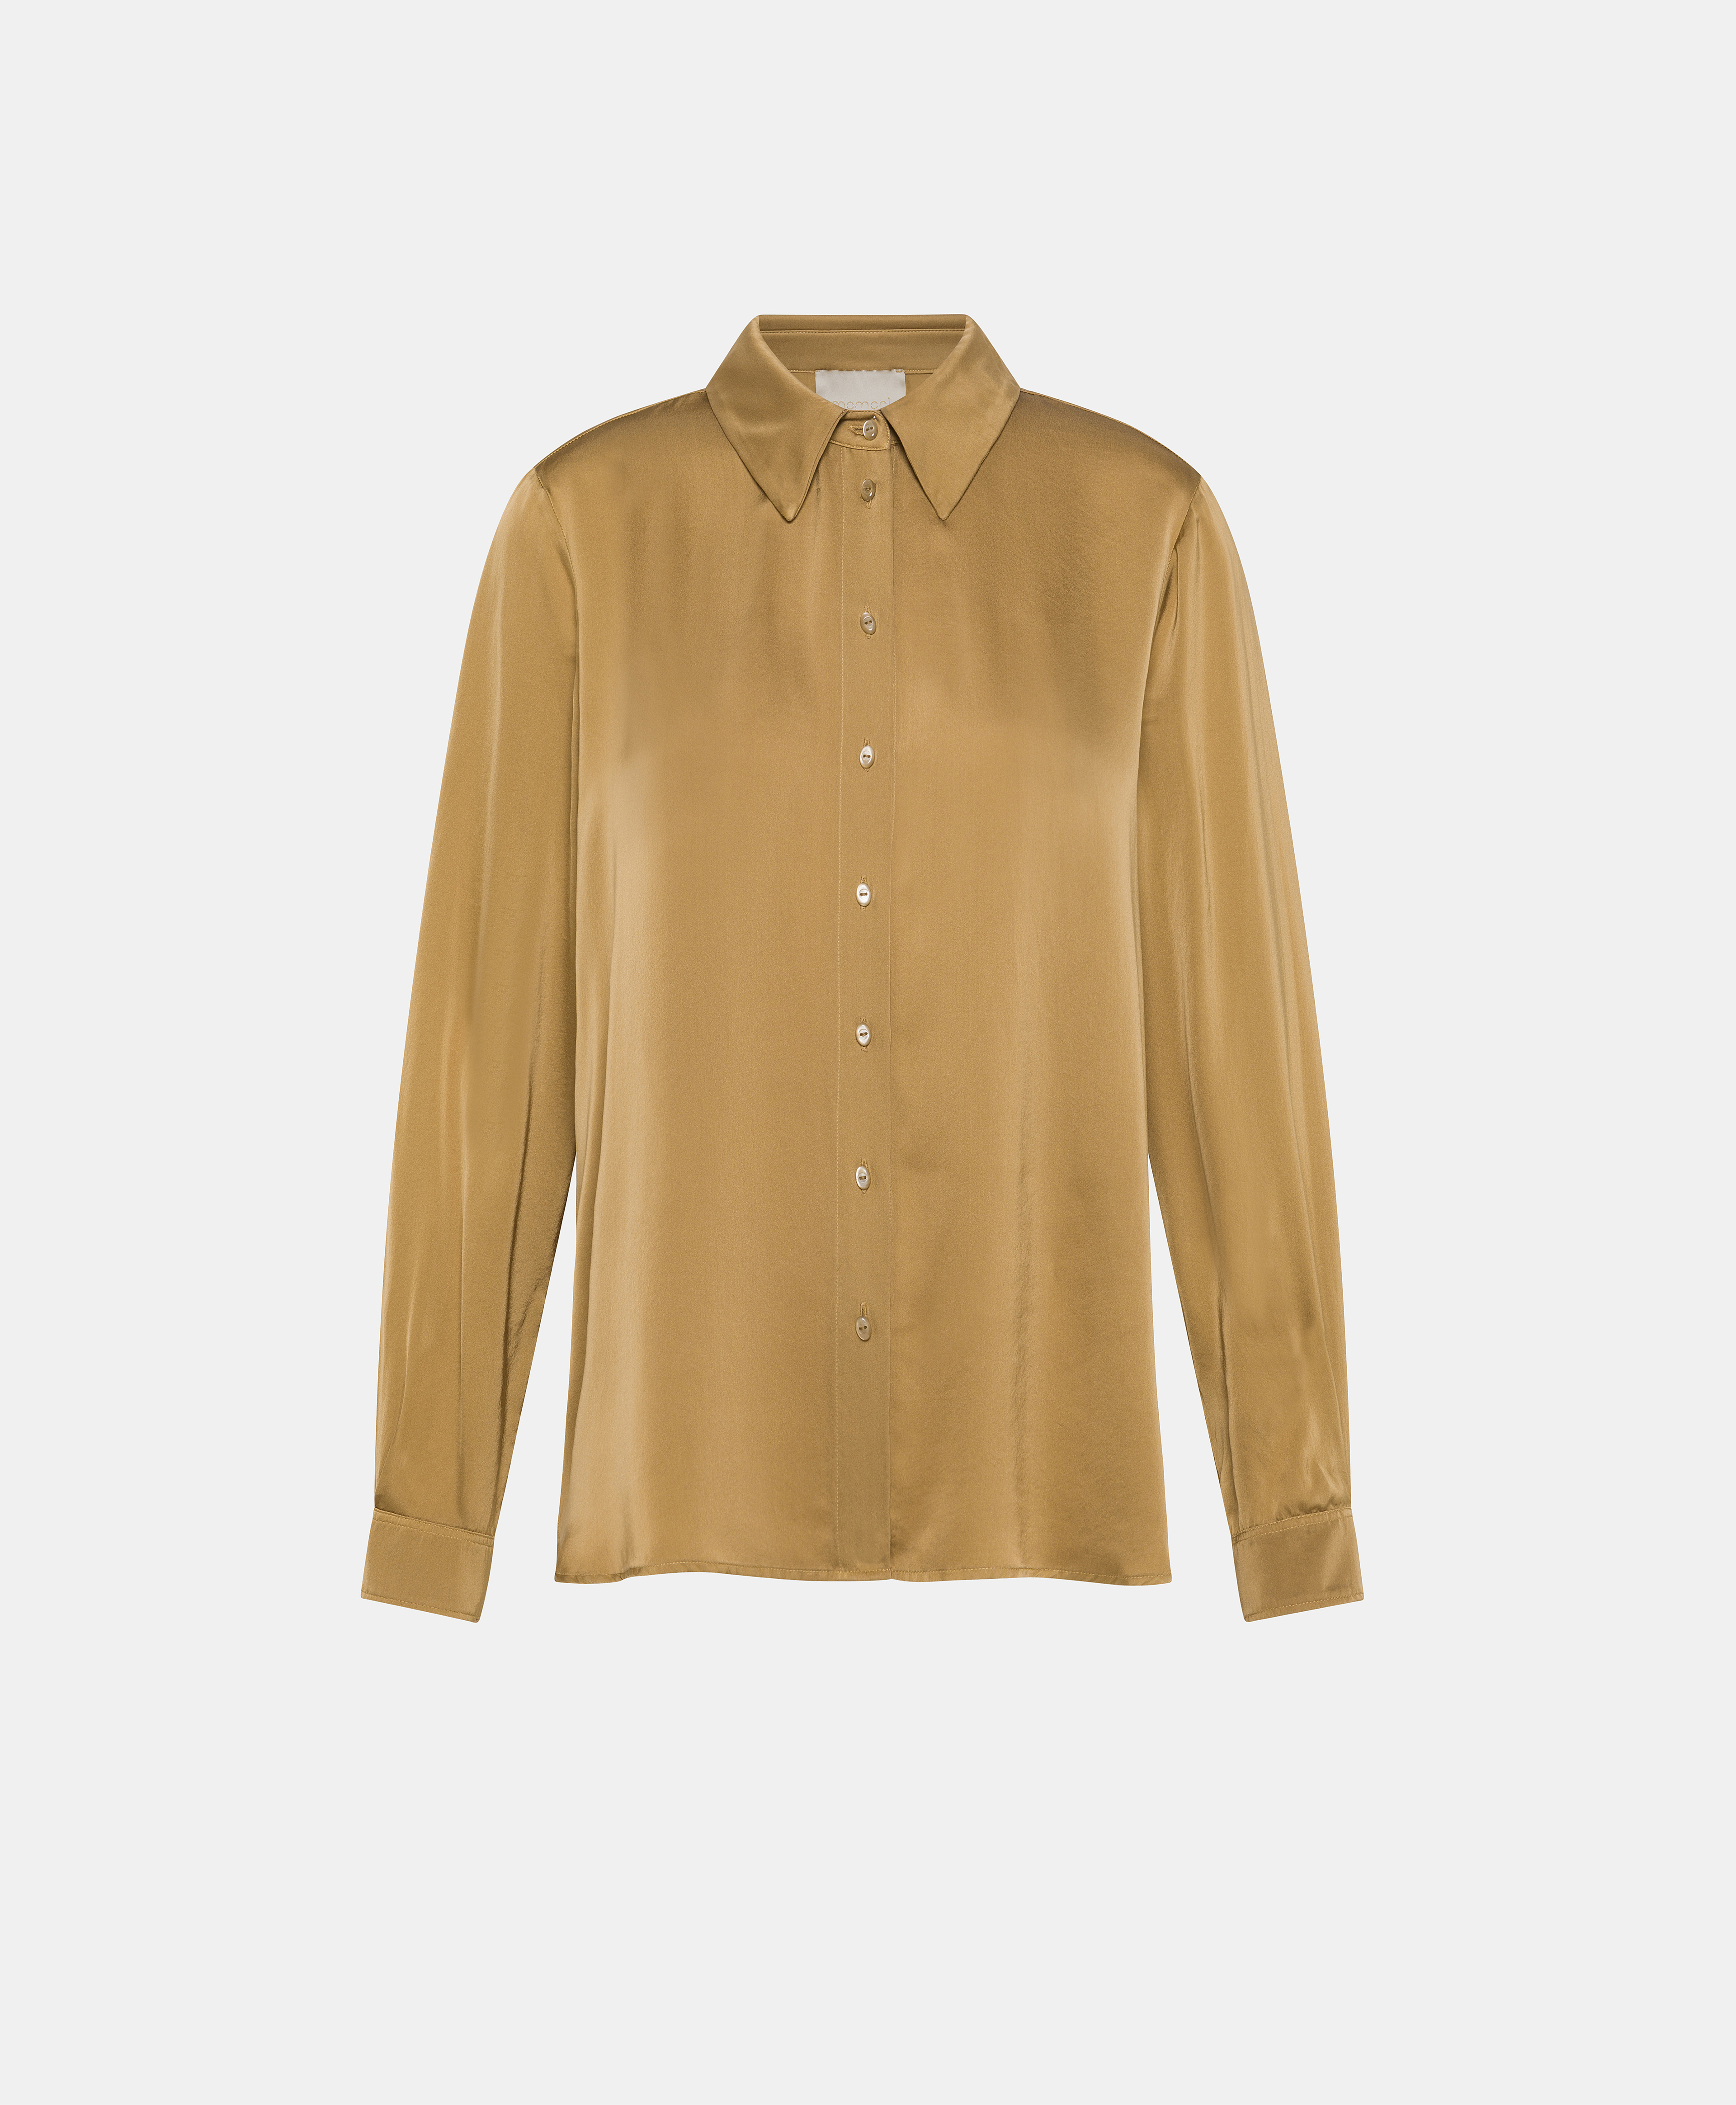 ARLES BIS SHIRT IN SOLID COLOUR SATIN CREPE - GOLD - Momonì